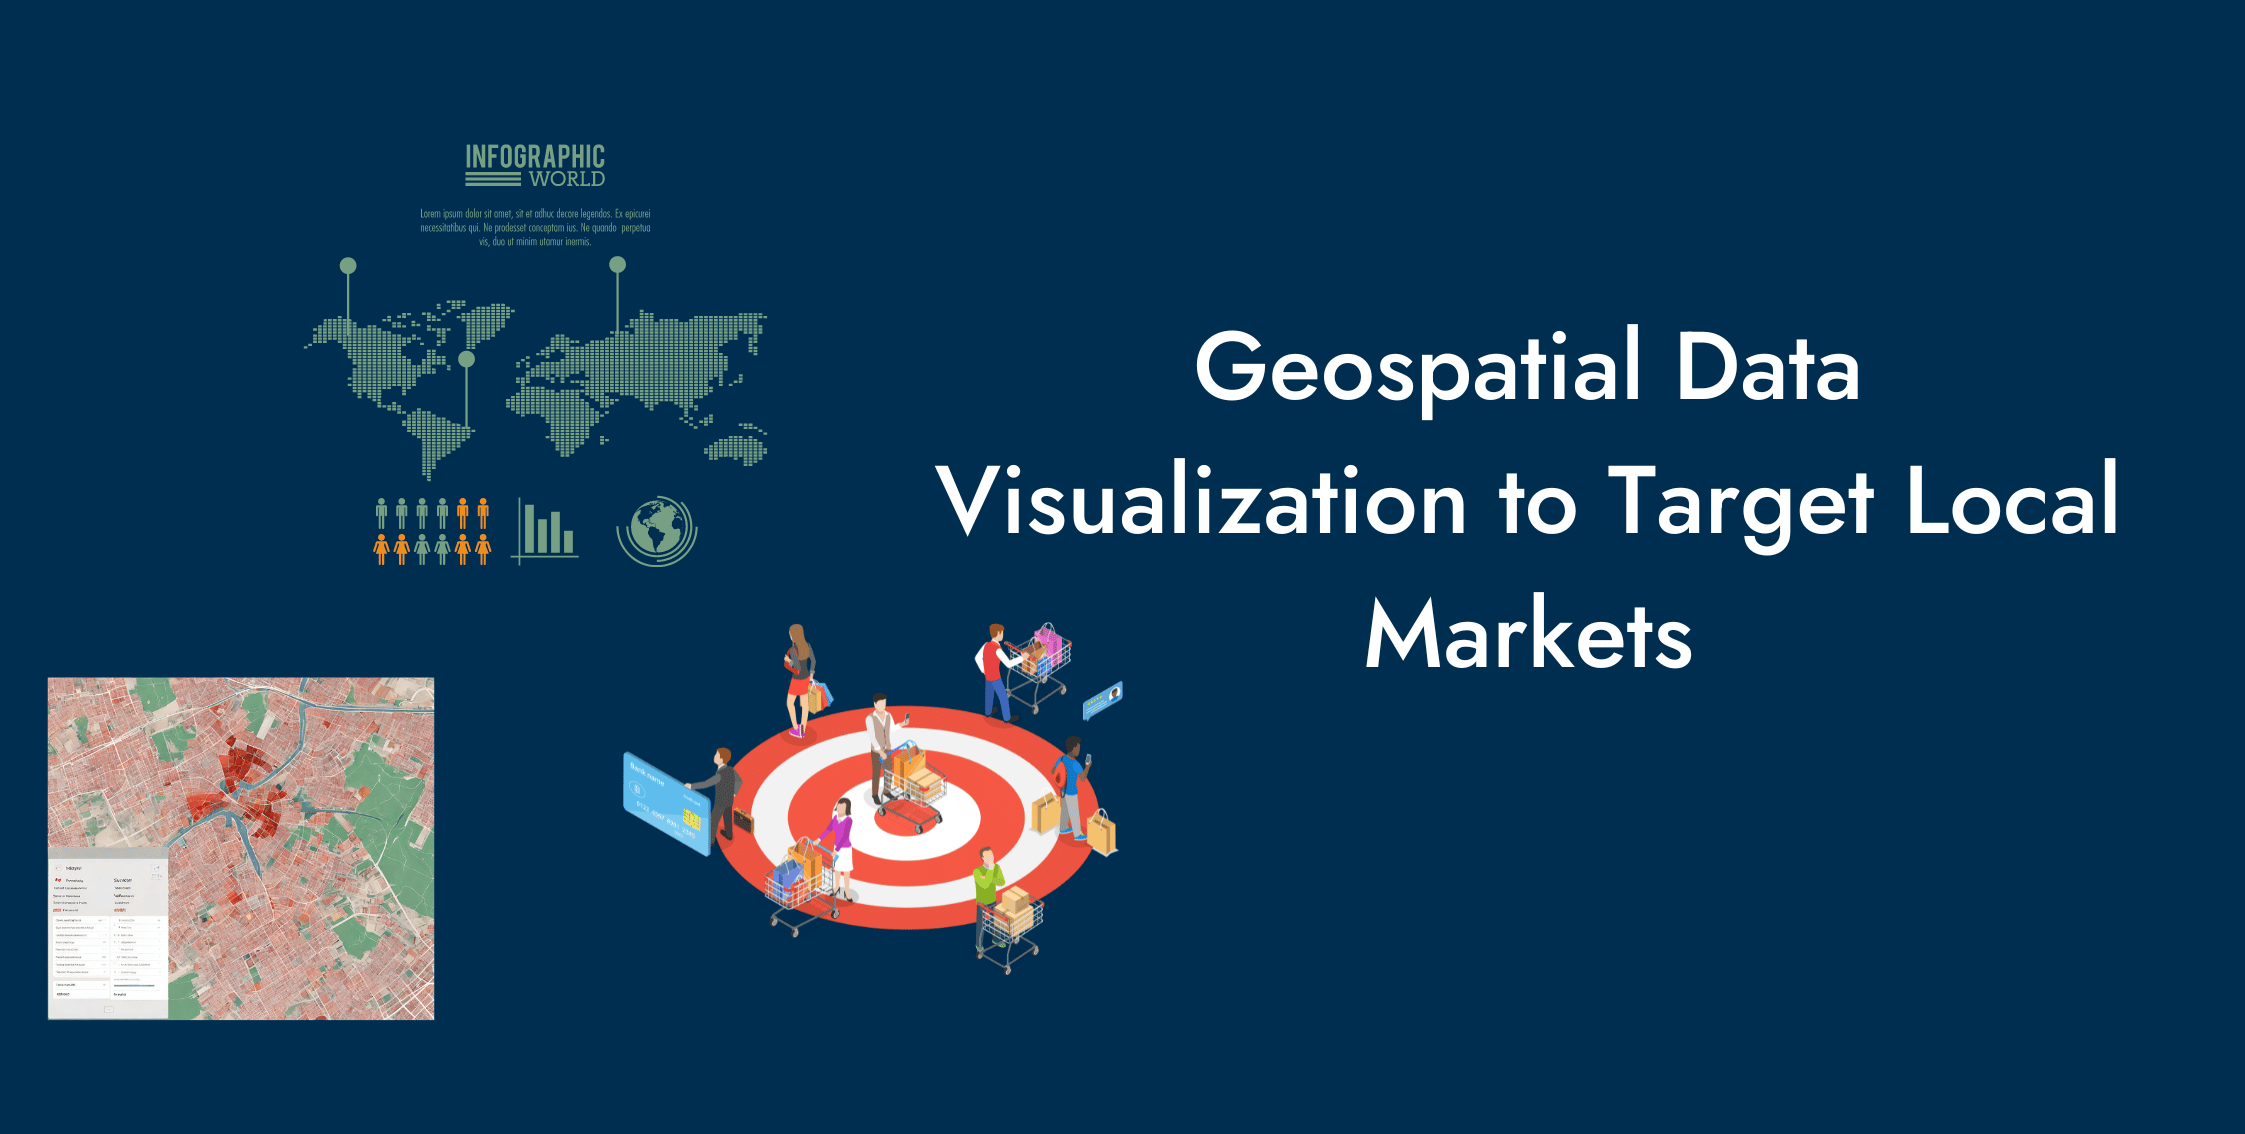 Geospatial Data Visualization for Target Local Markets